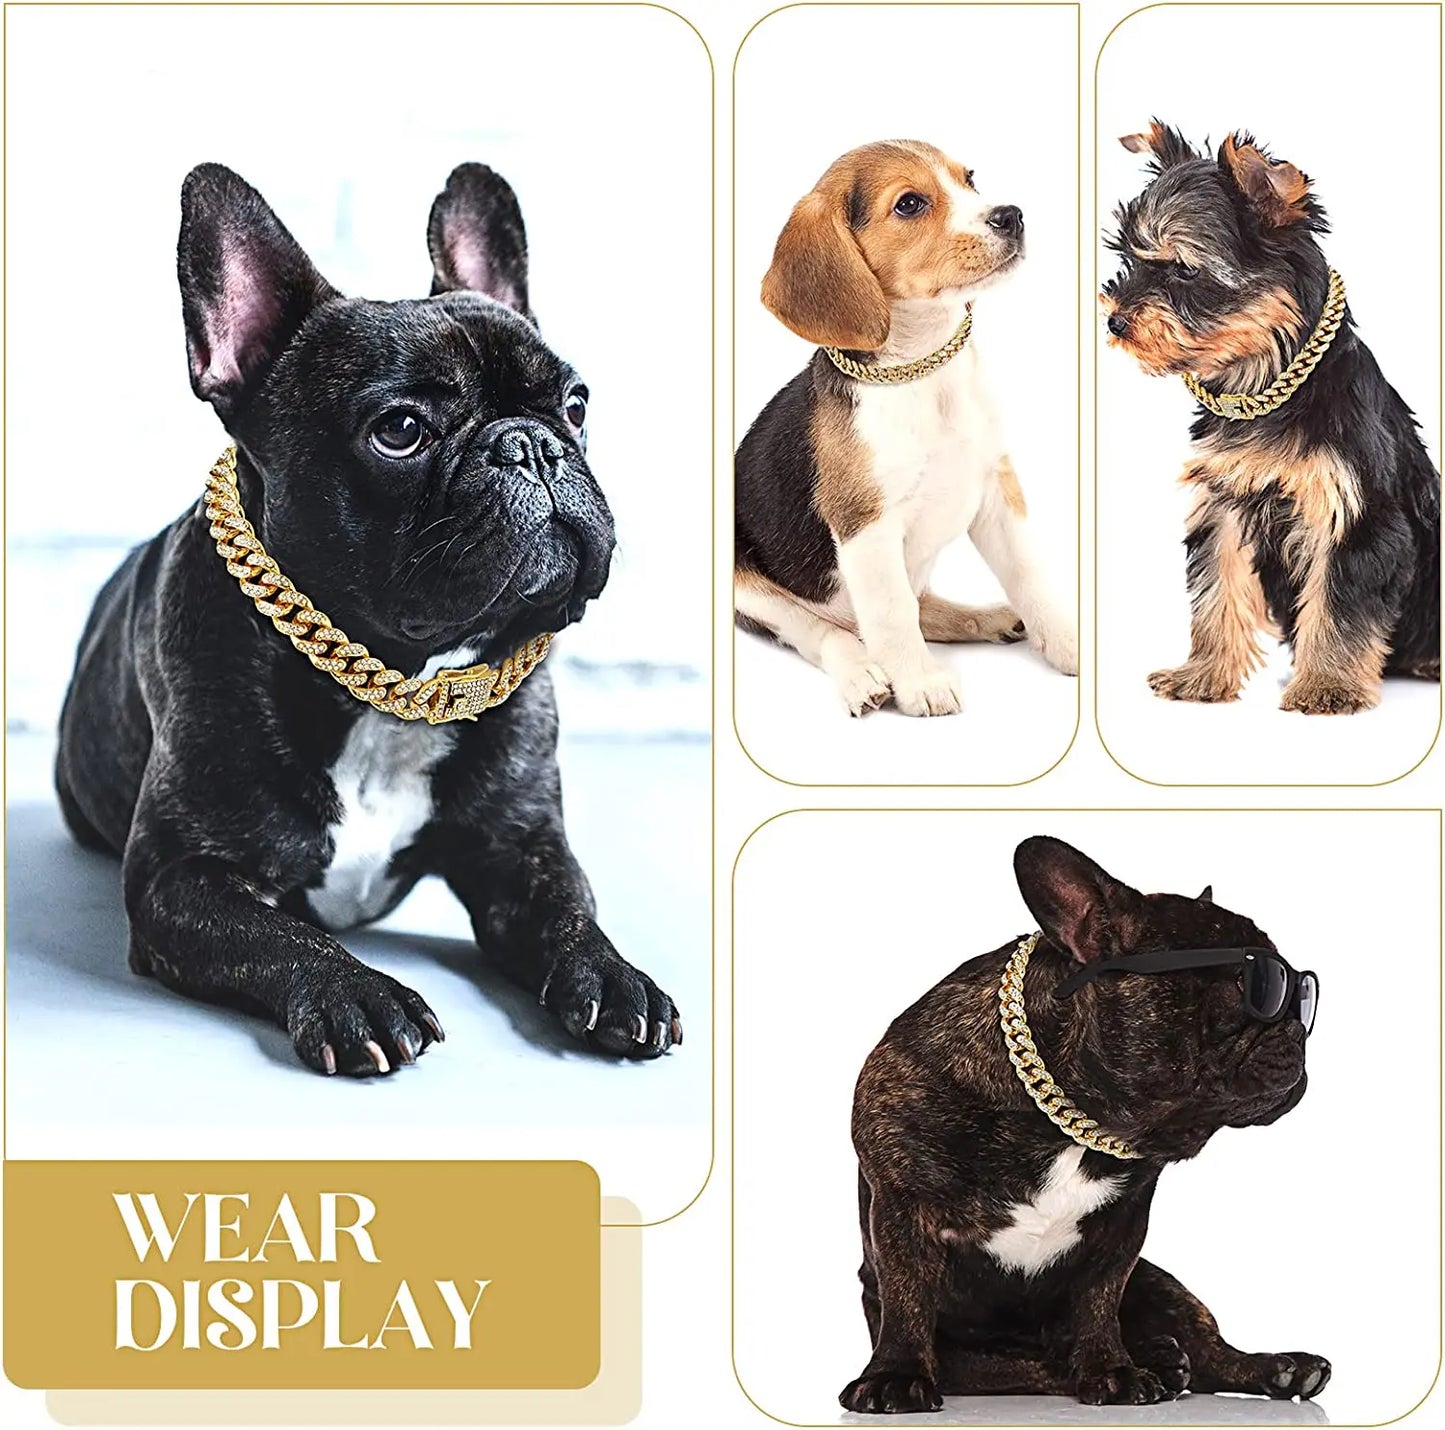 Gold Chain Collar for Pets